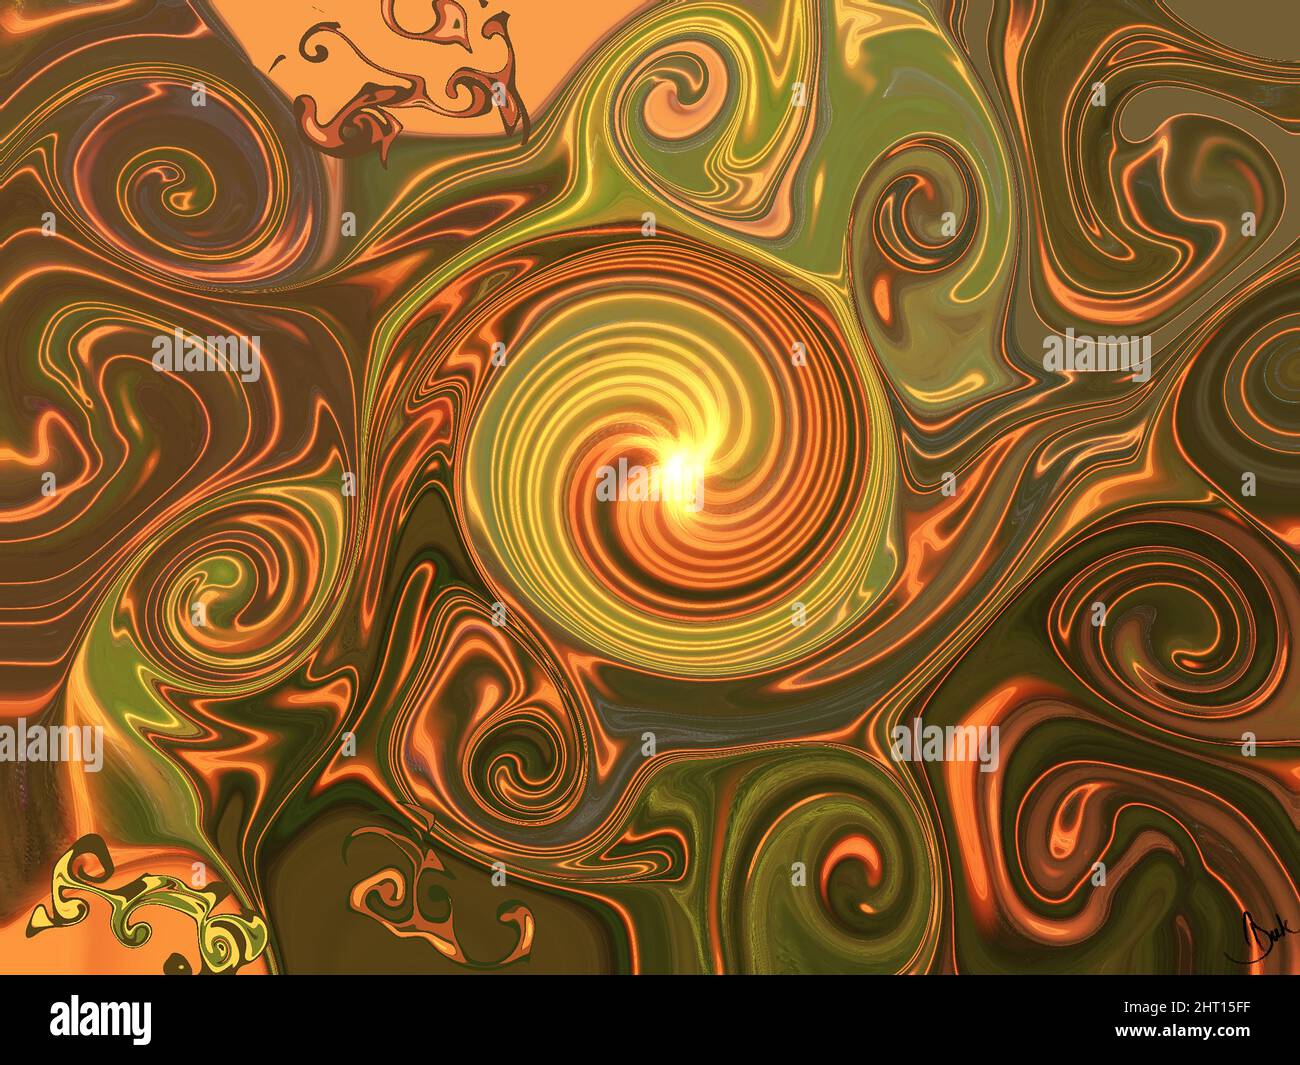 Creative abstract background with swirl and fluid effect, brown and green gradients lined shapes. High quality illustration Stock Photo